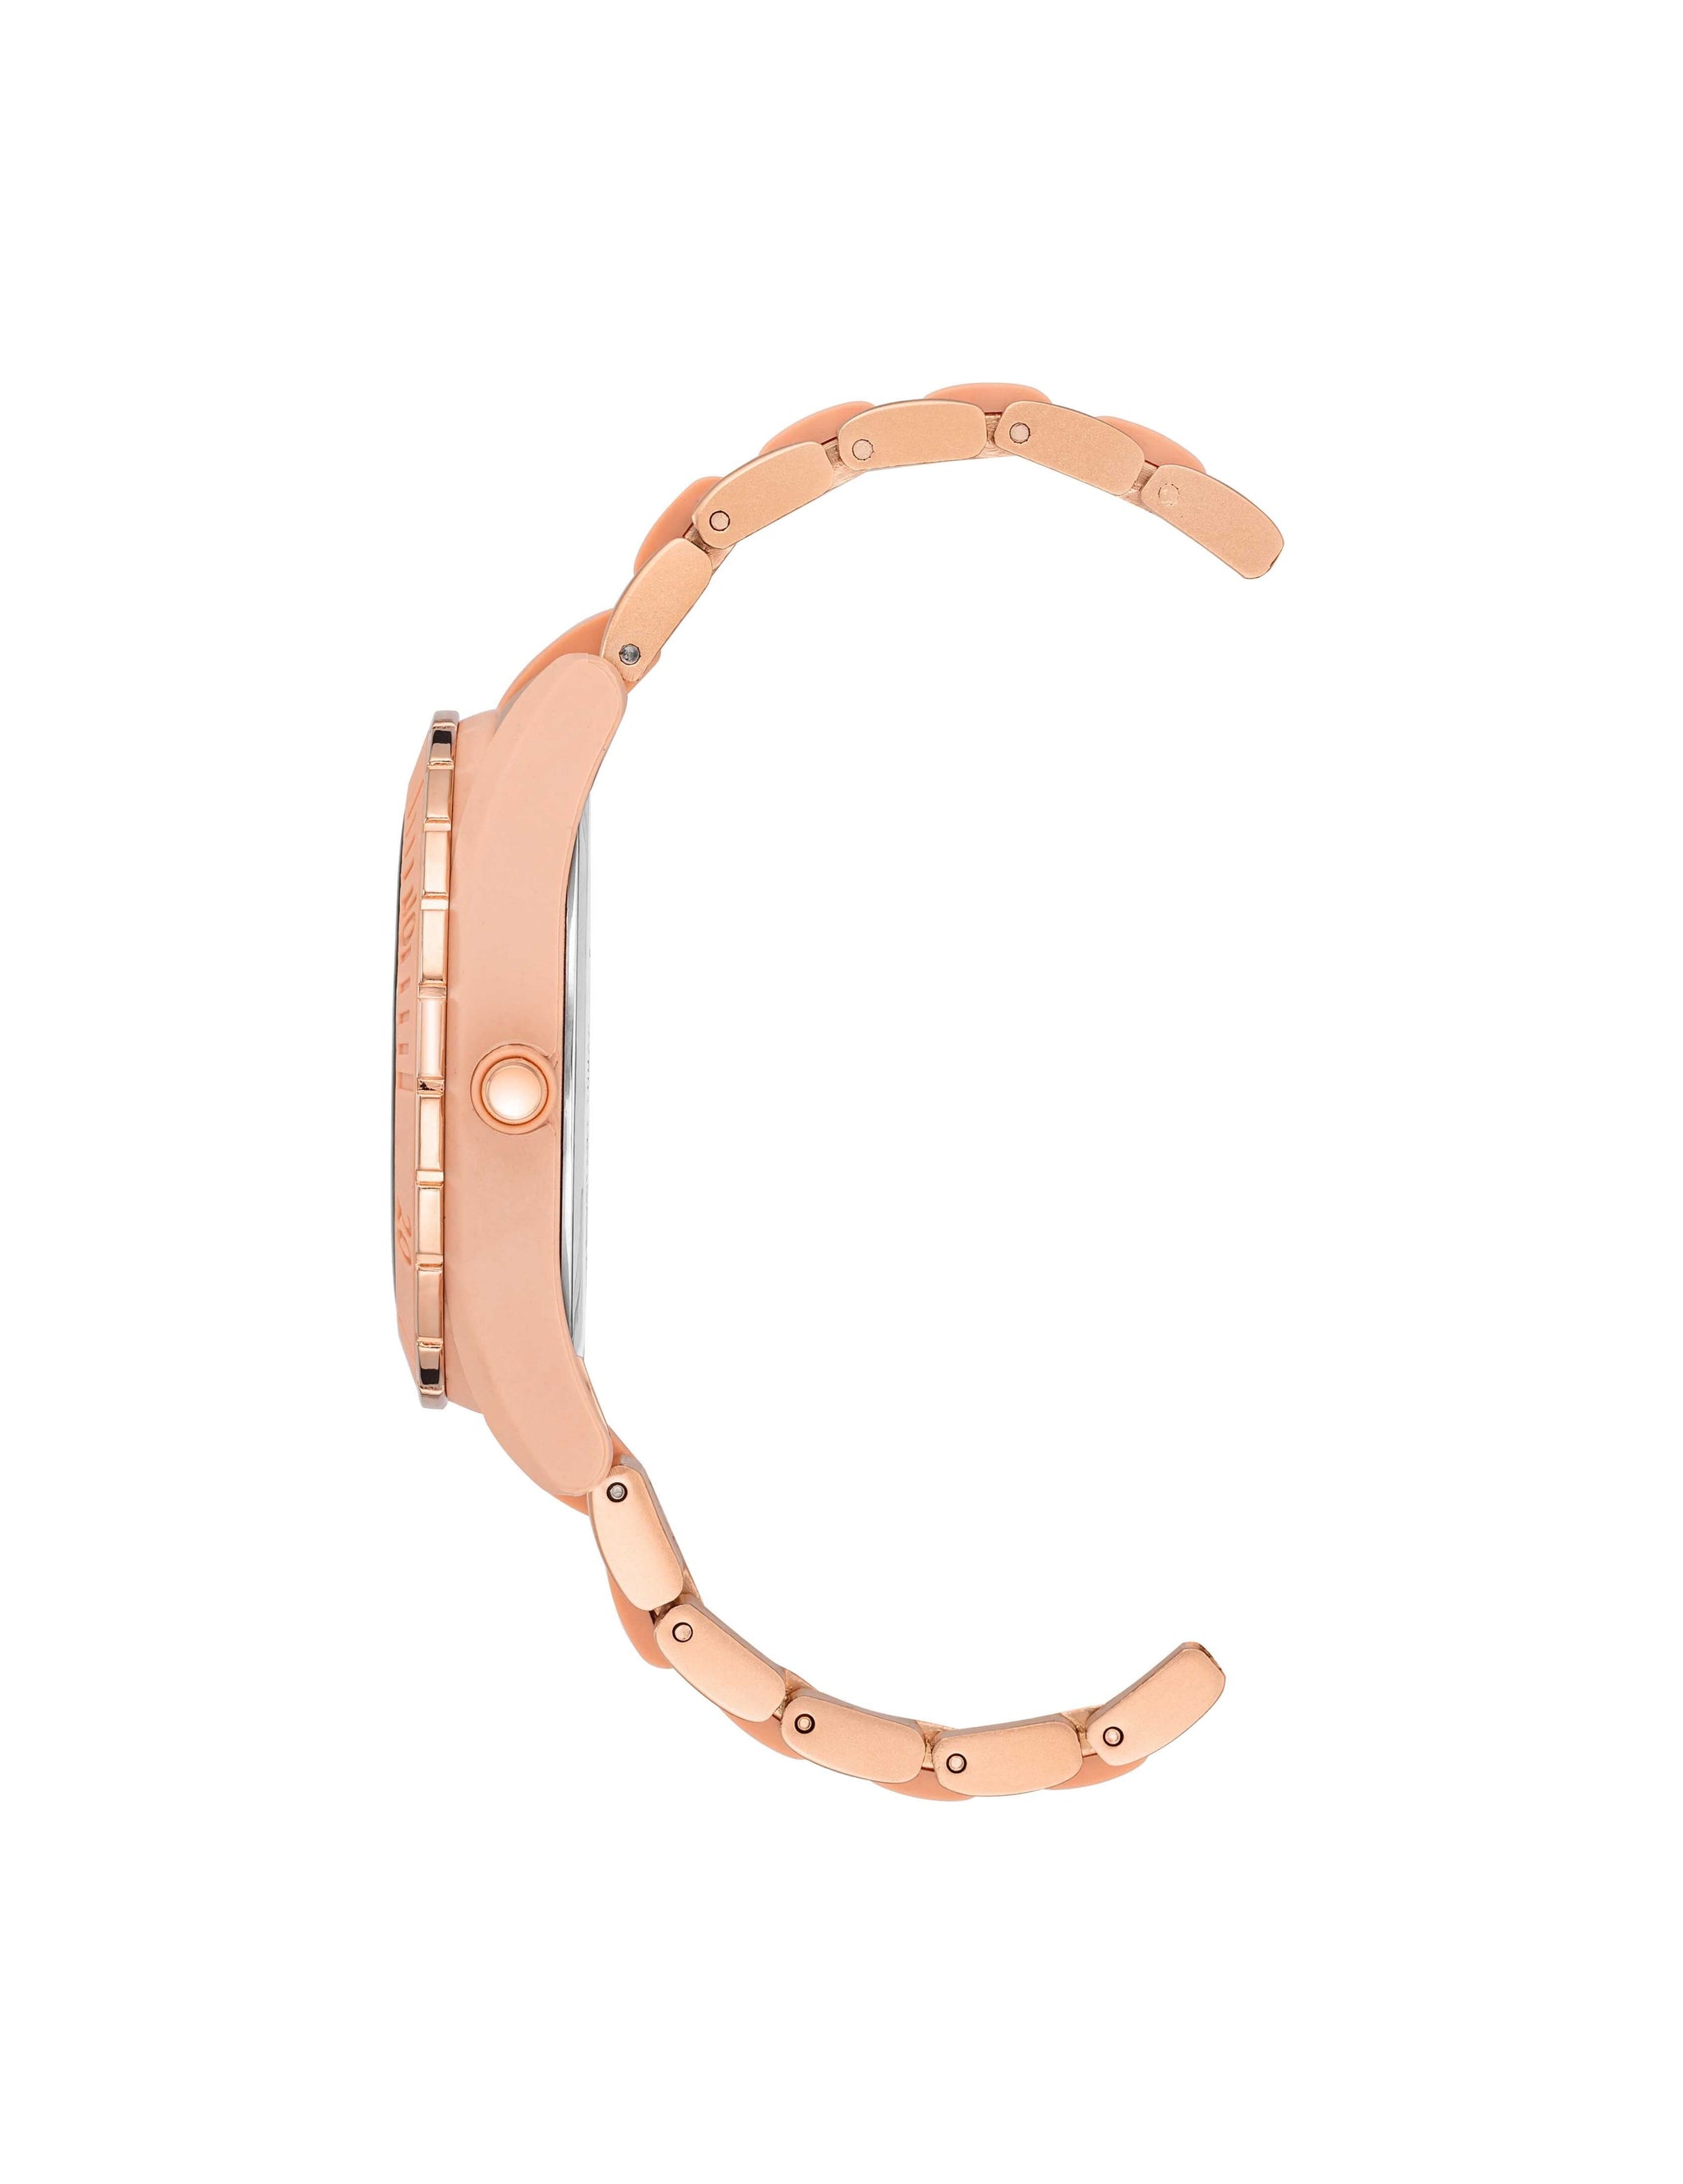 Considered Solar Recycled Ocean Plastic Bracelet Watch Pink/Rose-Gold ...